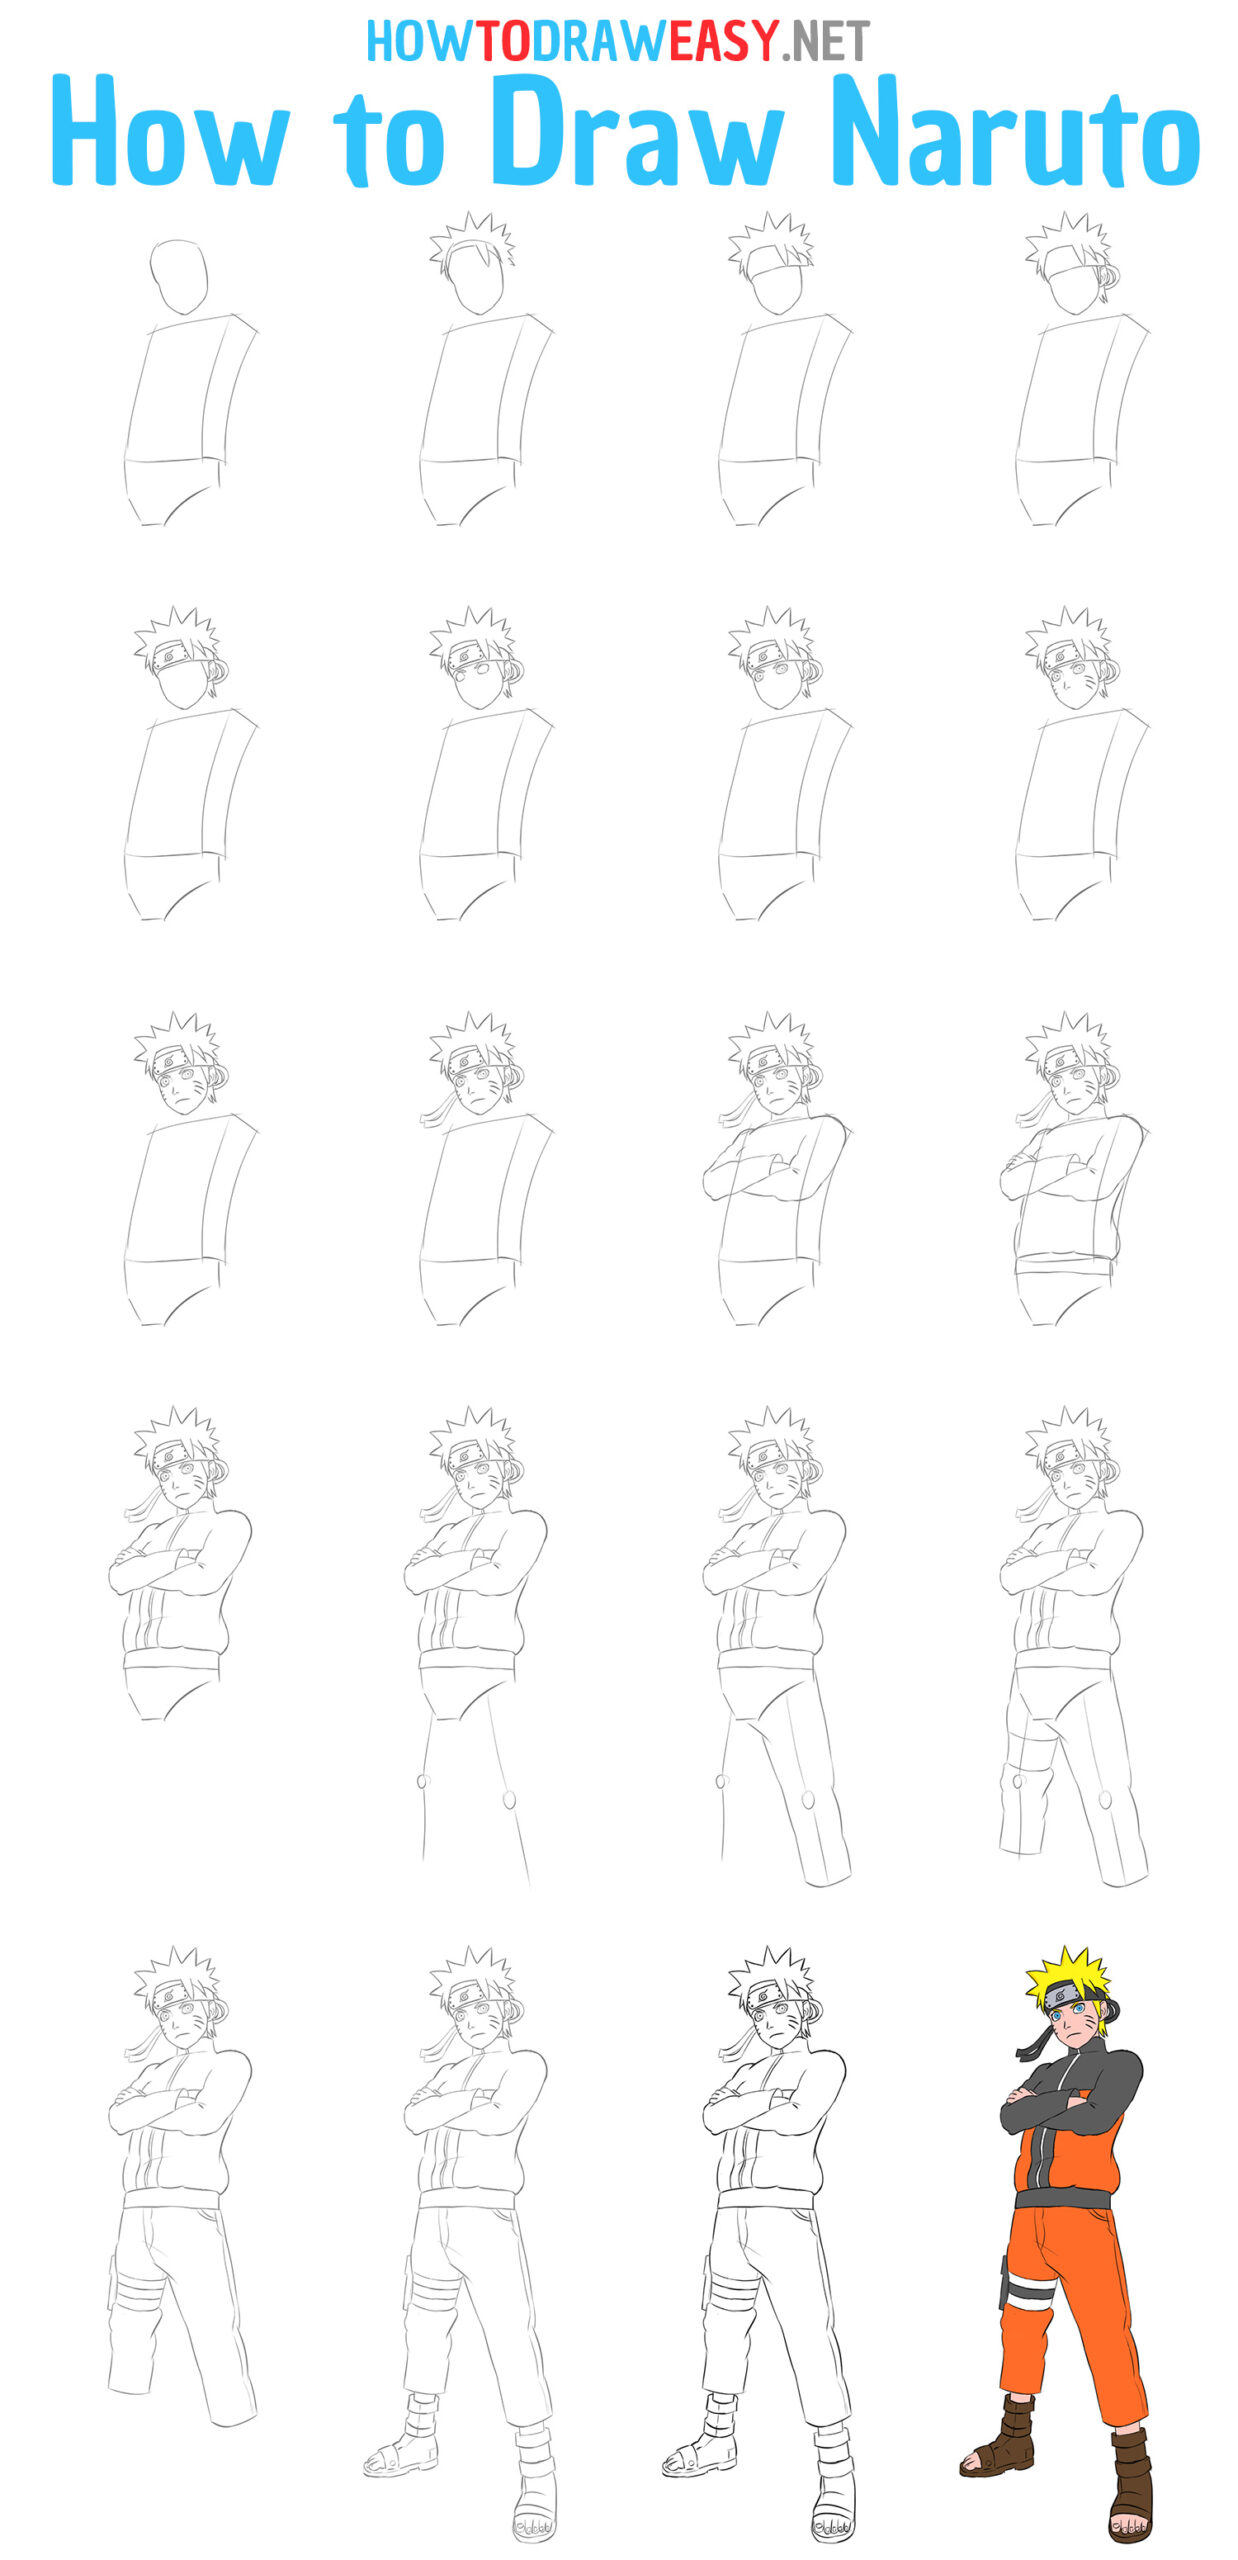 How to Draw Naruto Step by Step